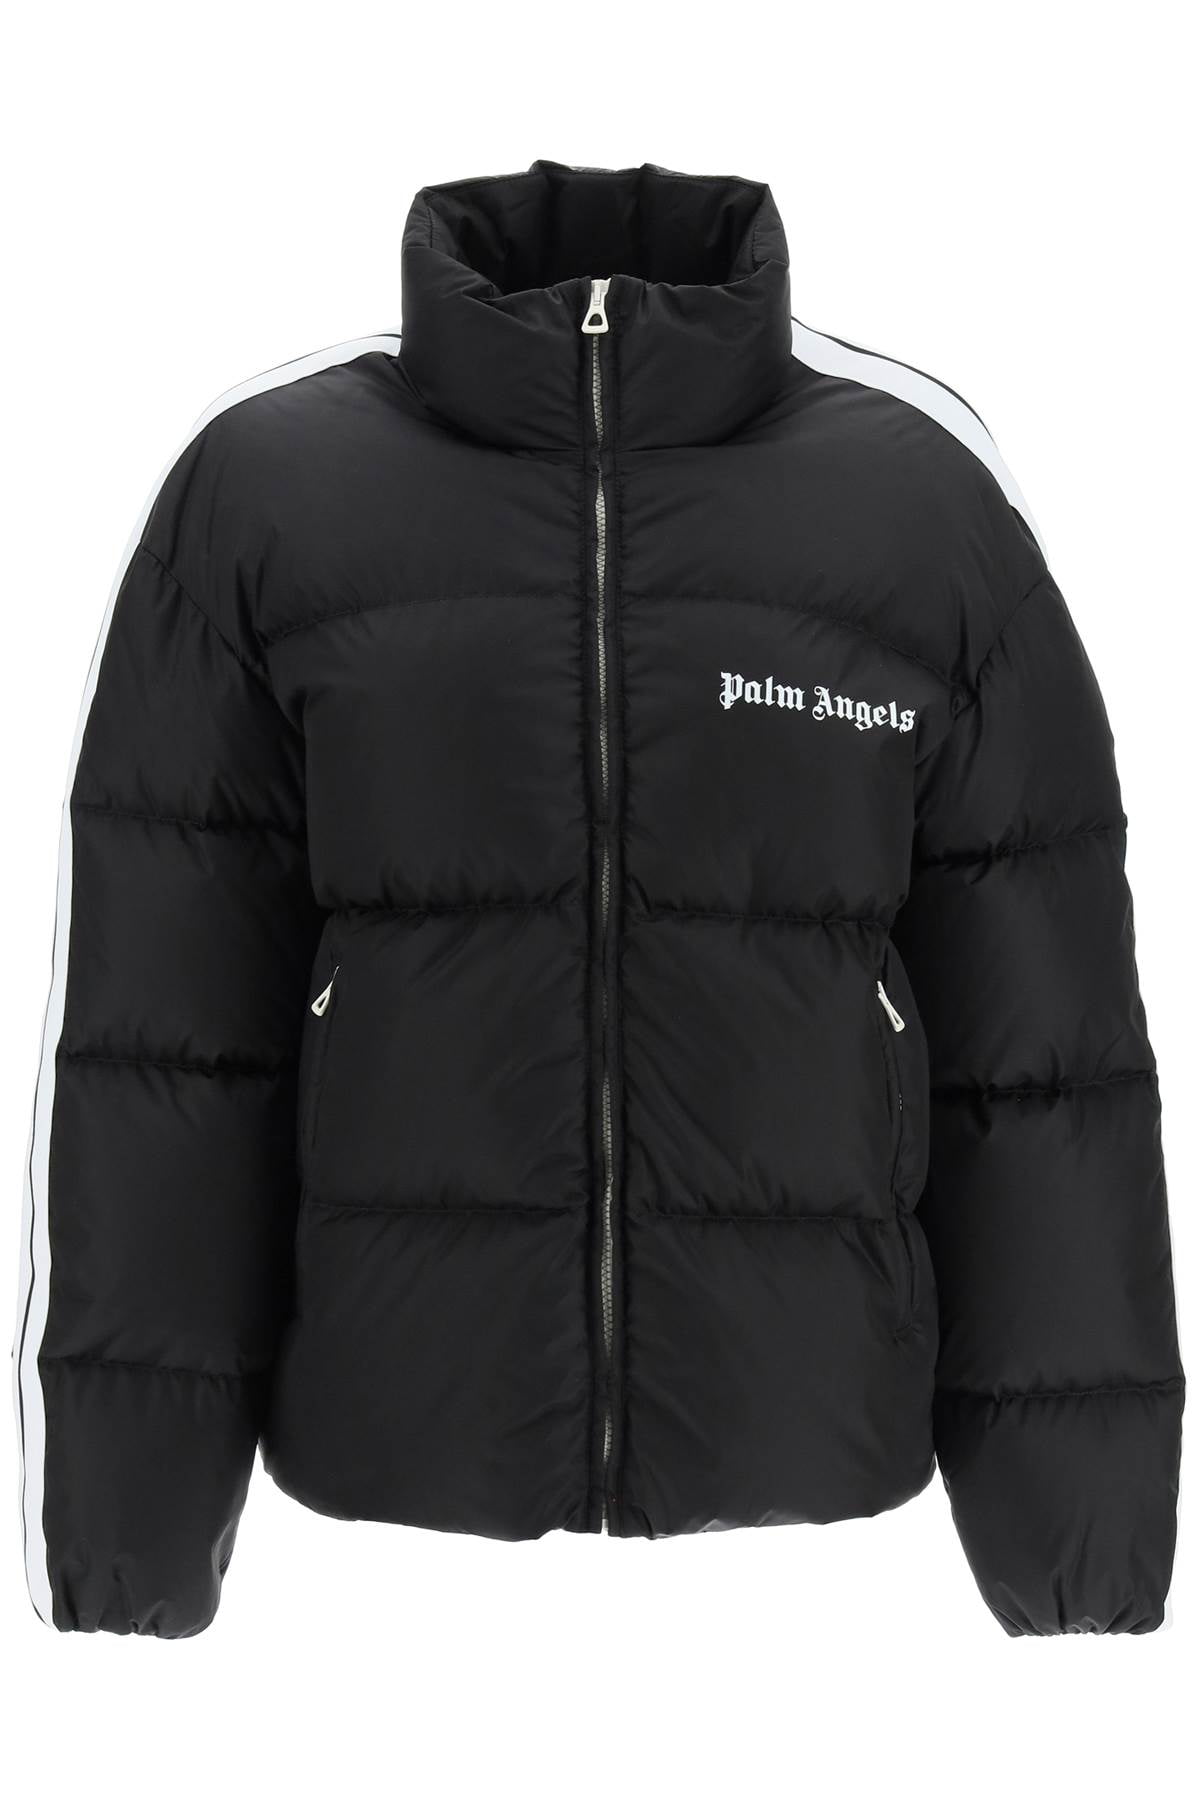 Palm angels logoed puffer jacket with bands - Walmart.com